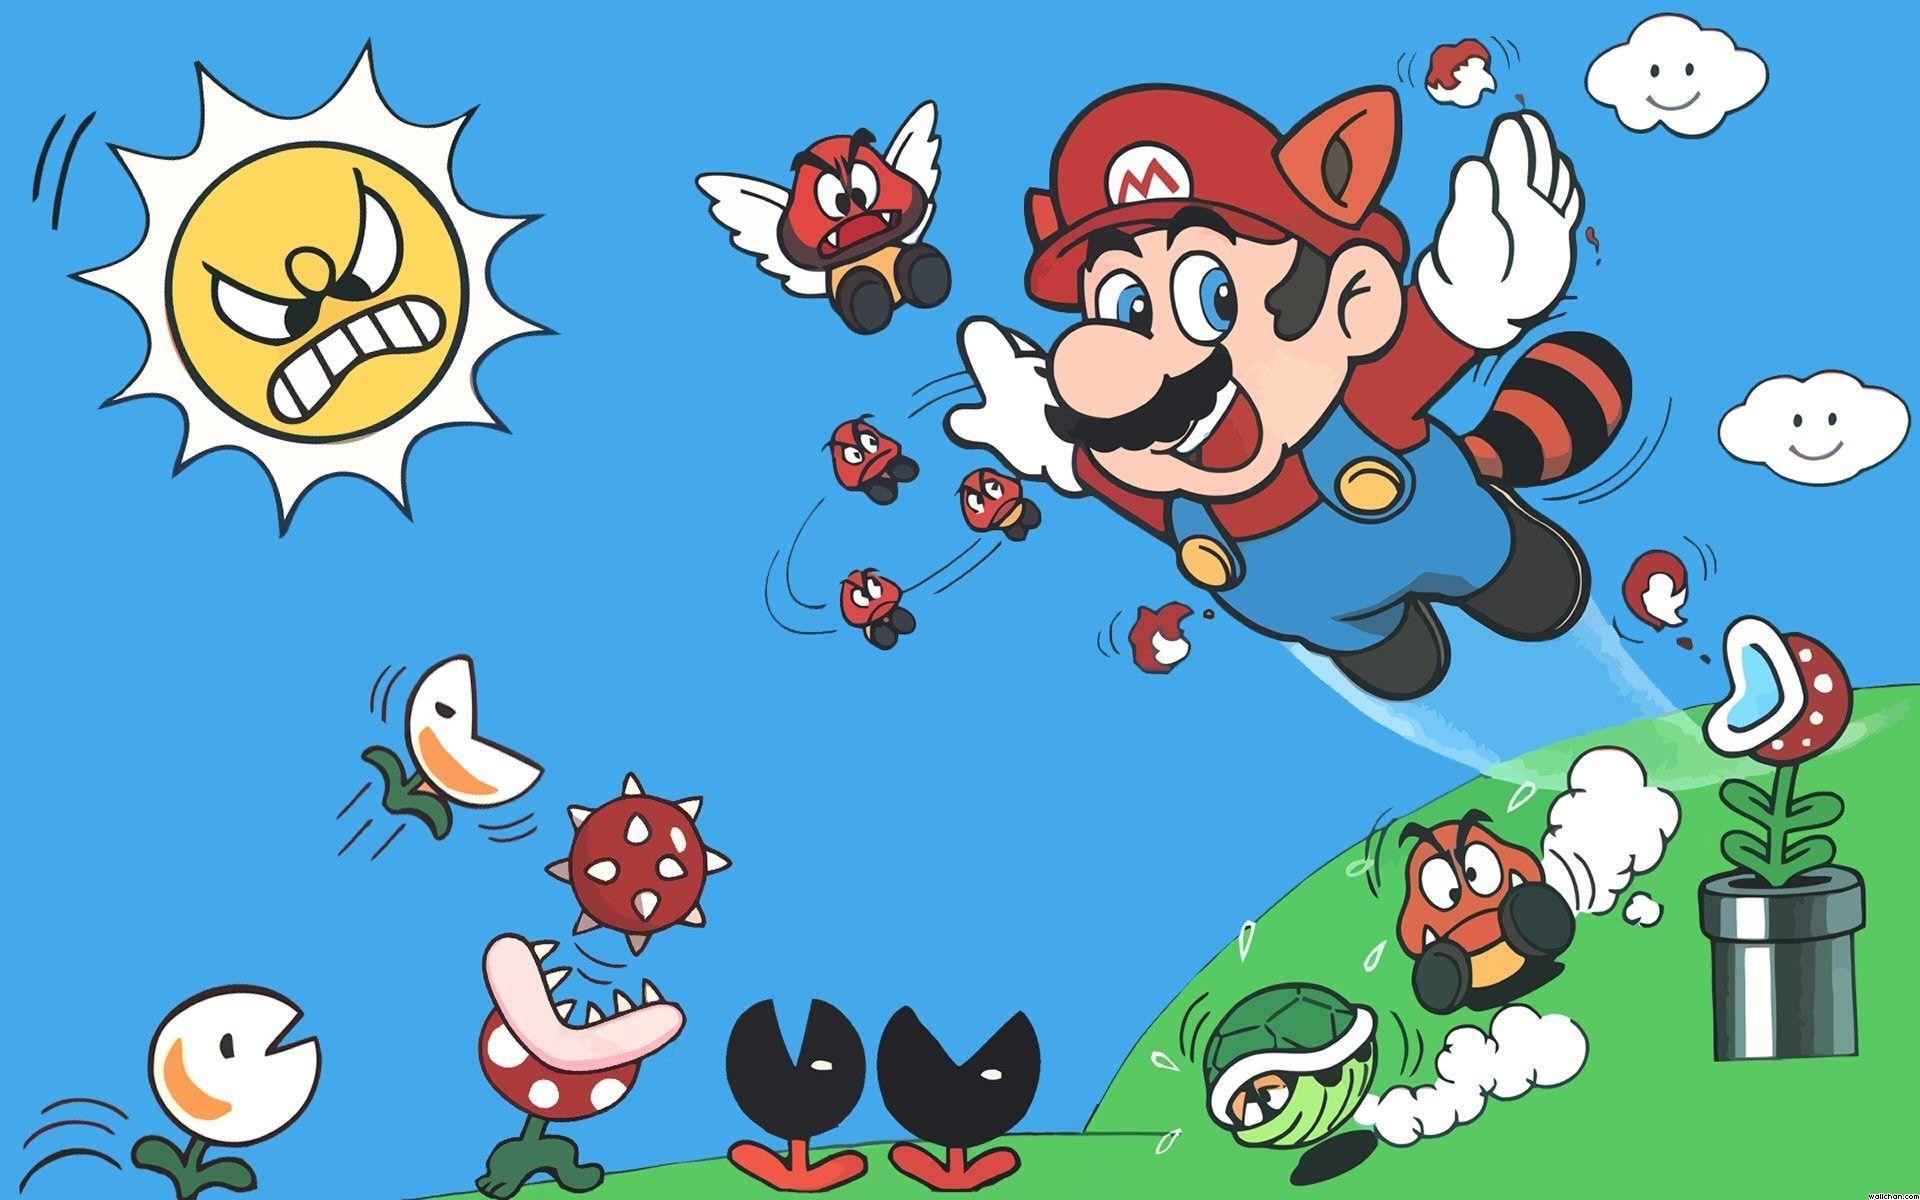 Super Mario Backgrounds  Wallpapers Backgrounds Images Art Photos  Super  mario games Super mario Hd backgrounds